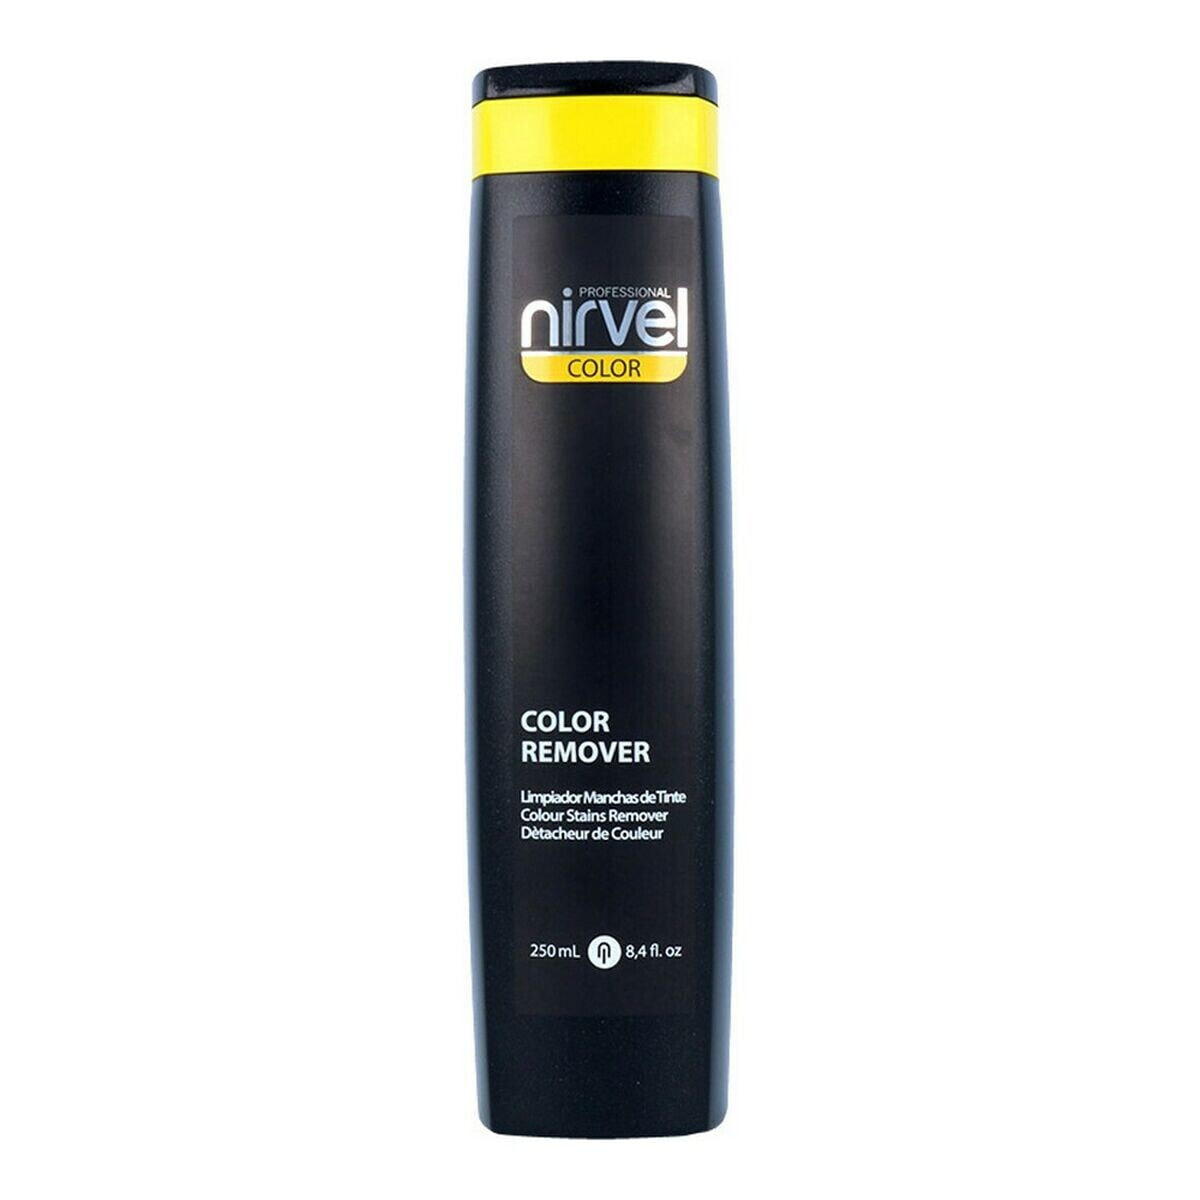 Средство от пятен Color Remover Nirvel Color Remover (250 ml)